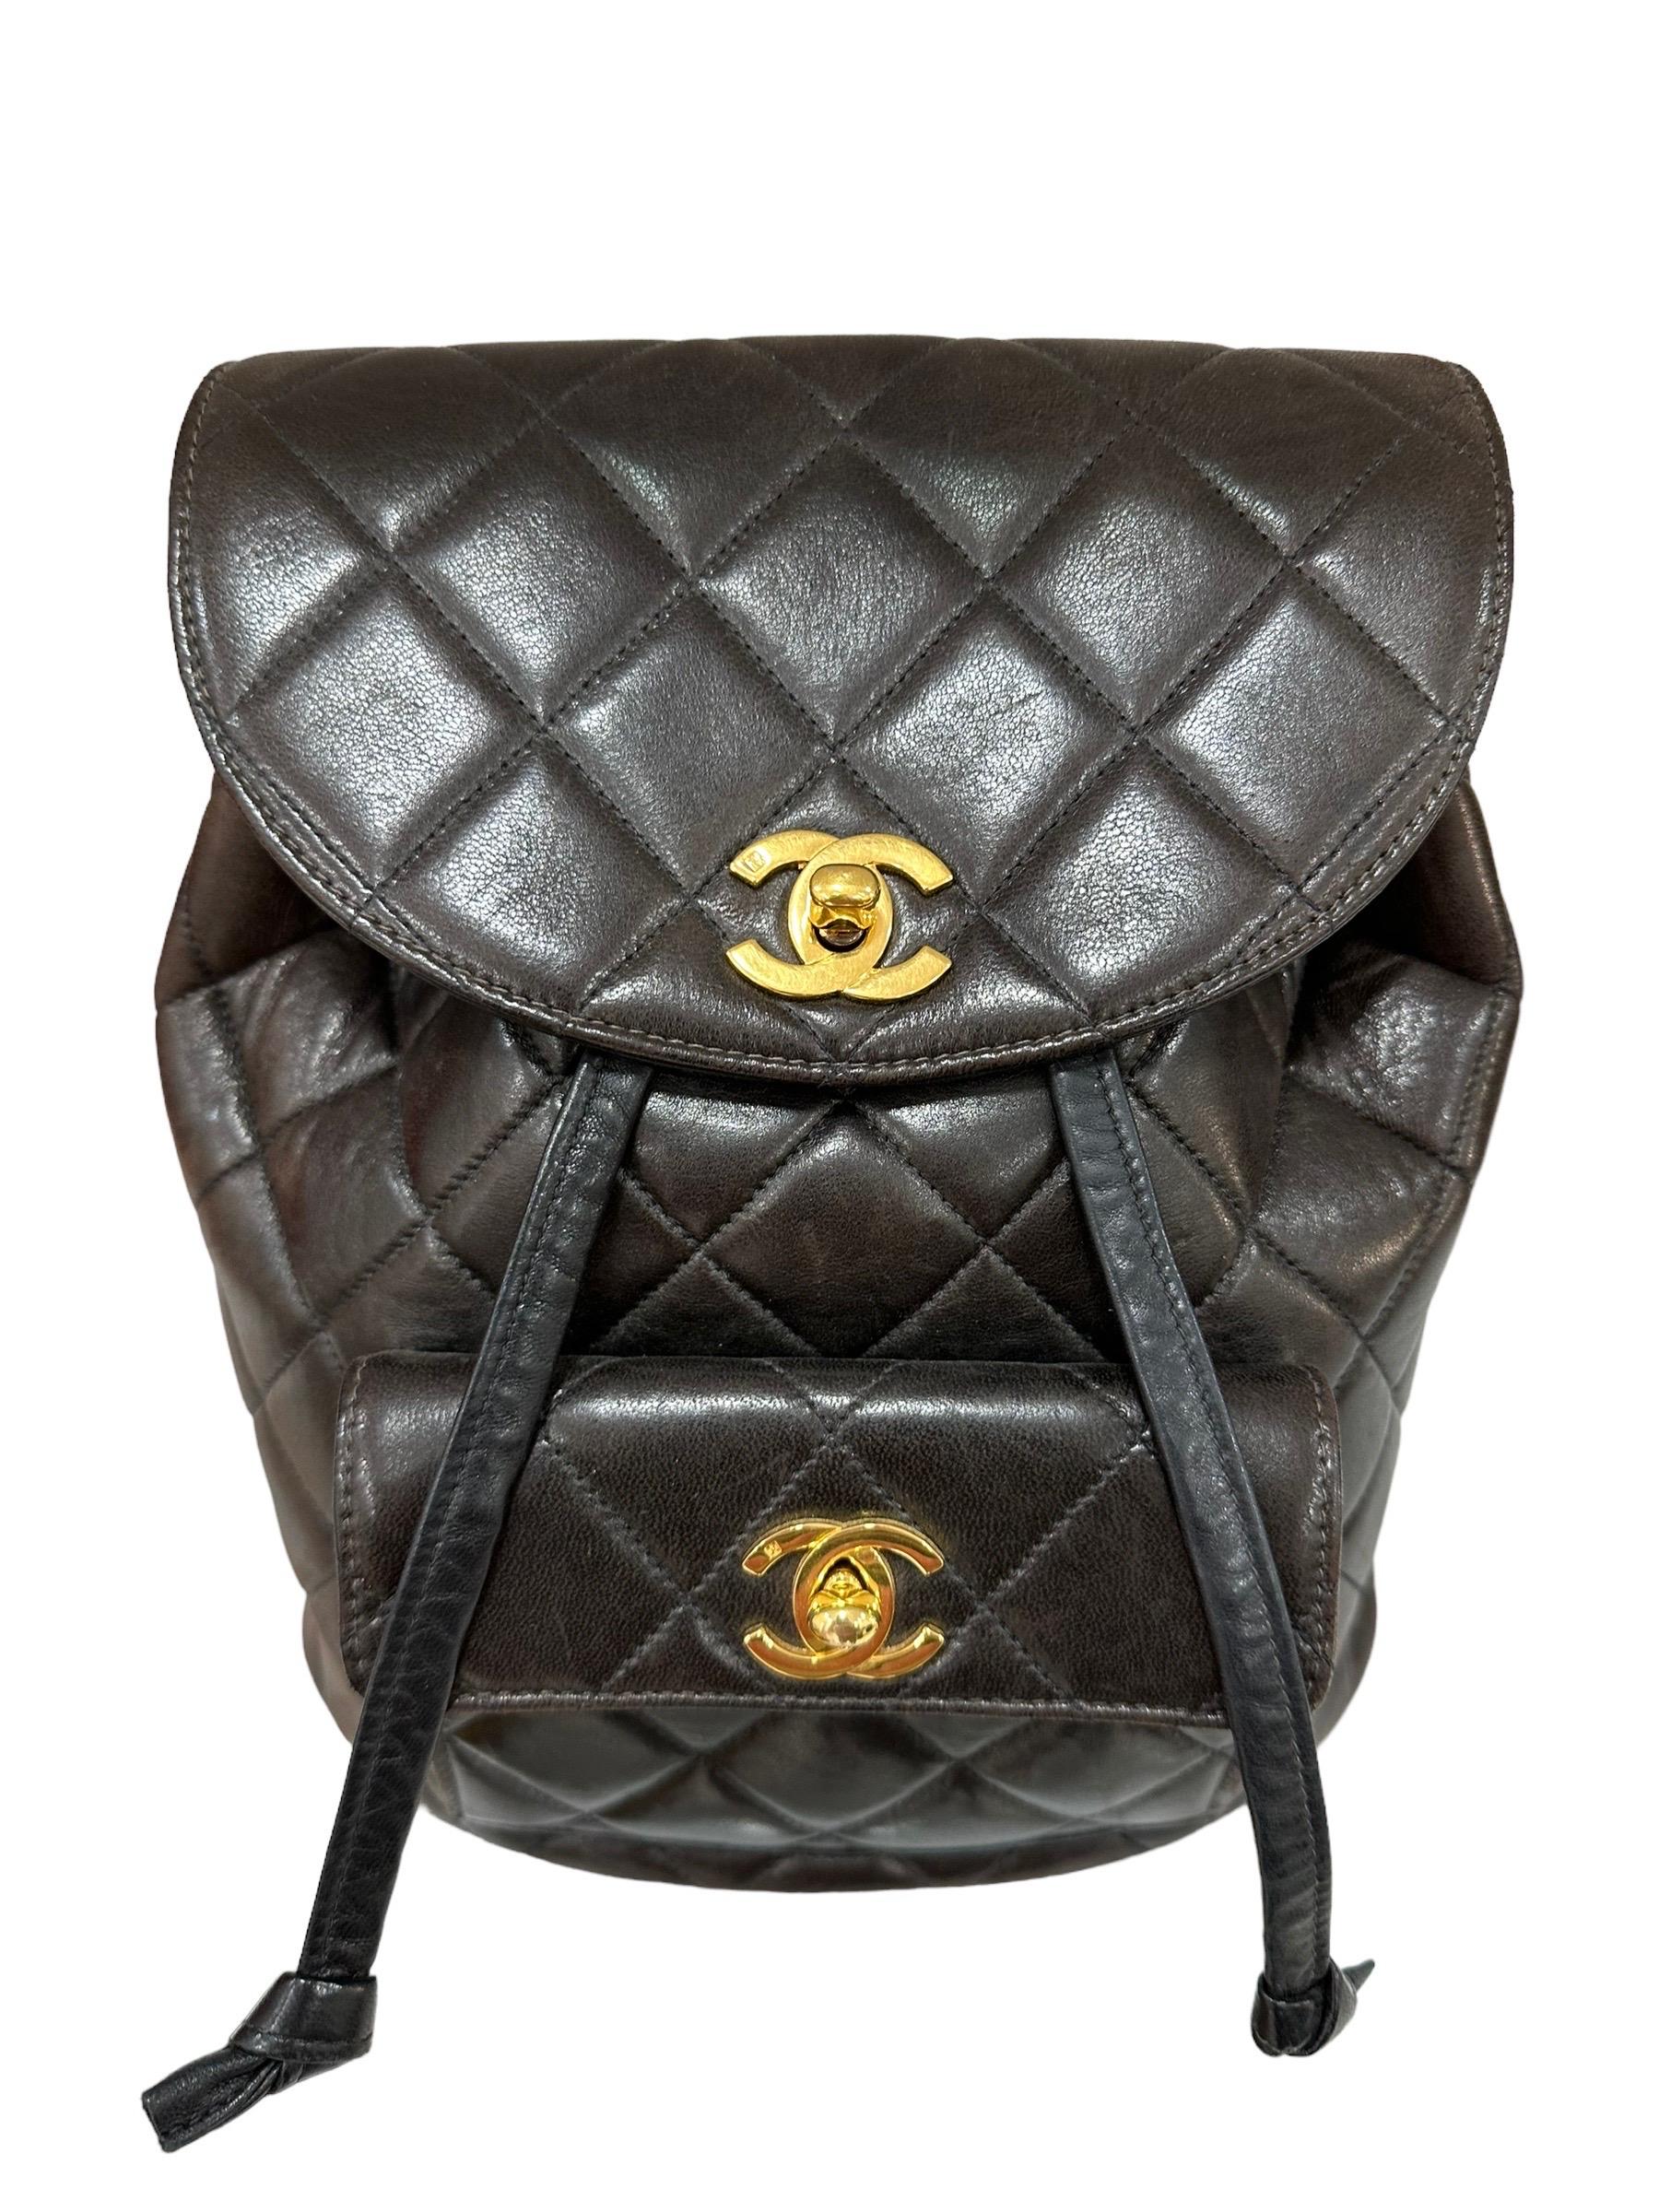 Chanel backpack, Duma model, made in dark brown quilted leather with golden hardware. Equipped with a flap with interlocking CC logo closure, internally covered in brown leather, quite large. Equipped with two adjustable leather and chain shoulder